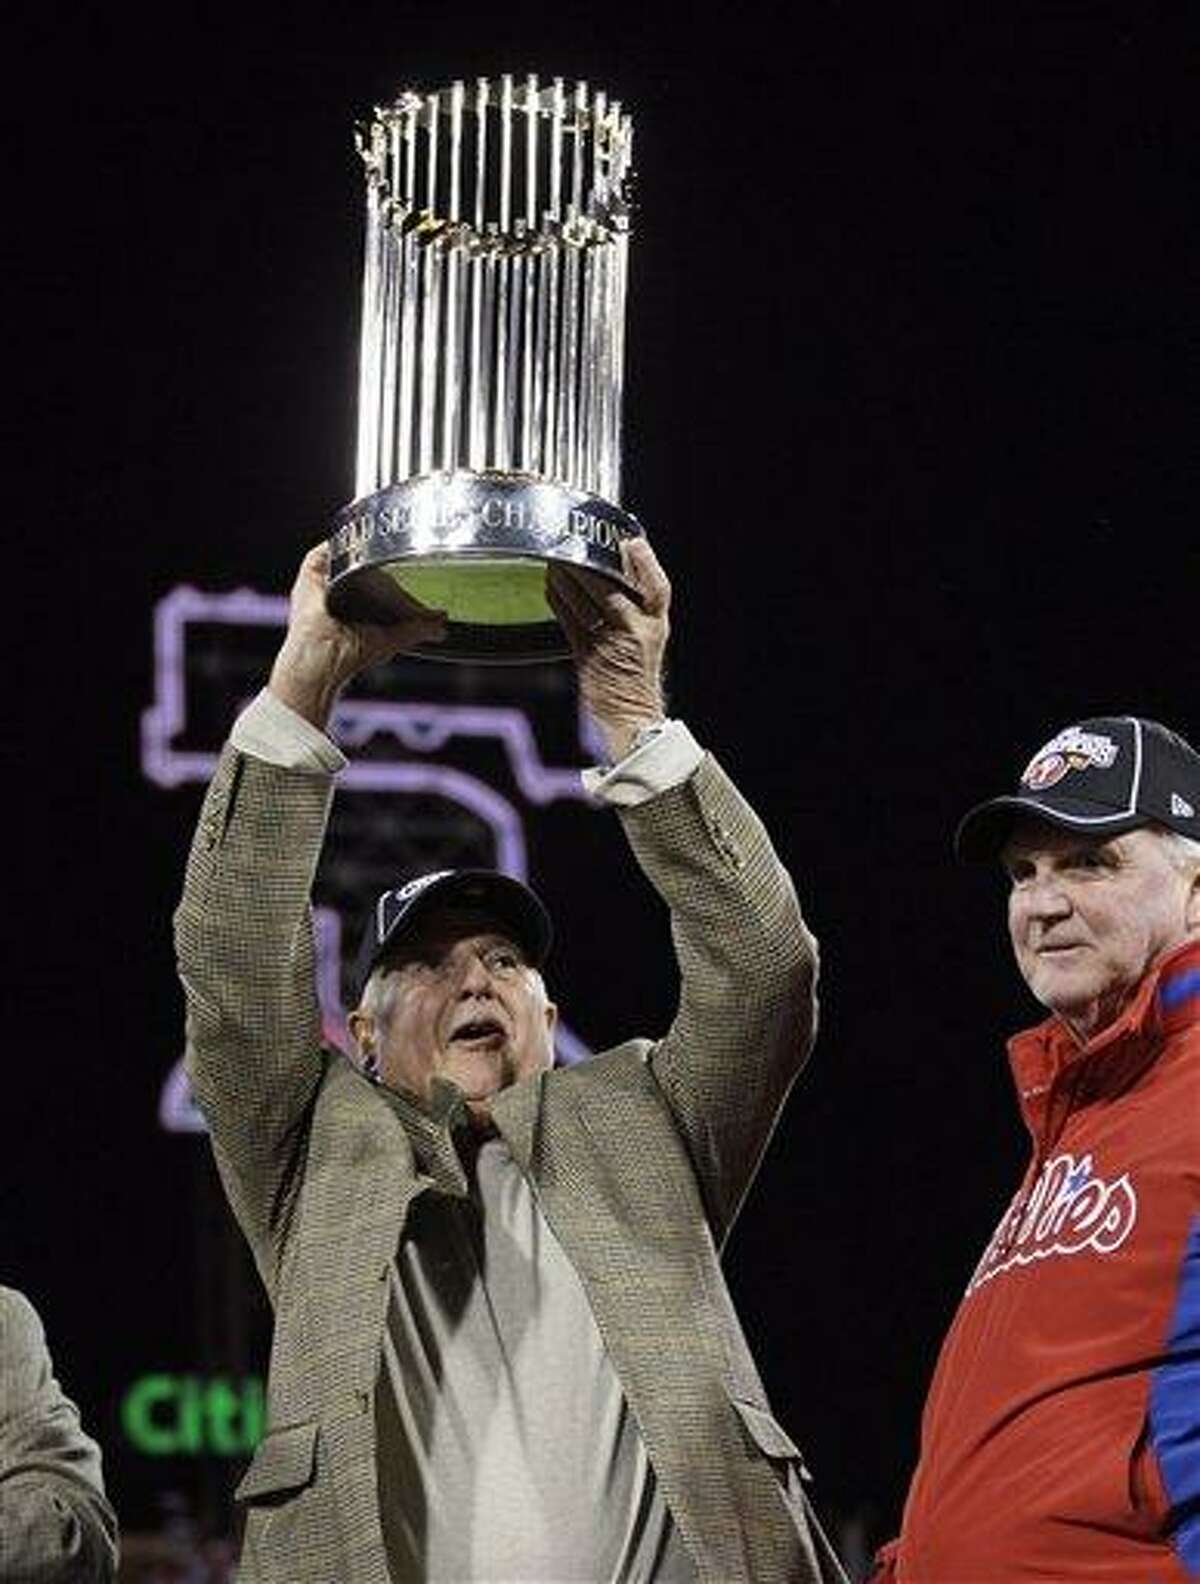 FILE - This Oct. 29, 2008, file photo shows Philadelphia Phillies general manager Pat Gillick raising the World Series trophy, as manager Charlie Manuel looks on after the Phillies beat he Tampa Bay Rays 4-3 in Game 5 to win the baseball World Series, in Philadelphia. Gillick, a former general manager whose teams won three World Series titles, has been elected to baseball's Hall of Fame, Monday, Dec. 6, 2010.(AP Photo/David J. Phillip, File)